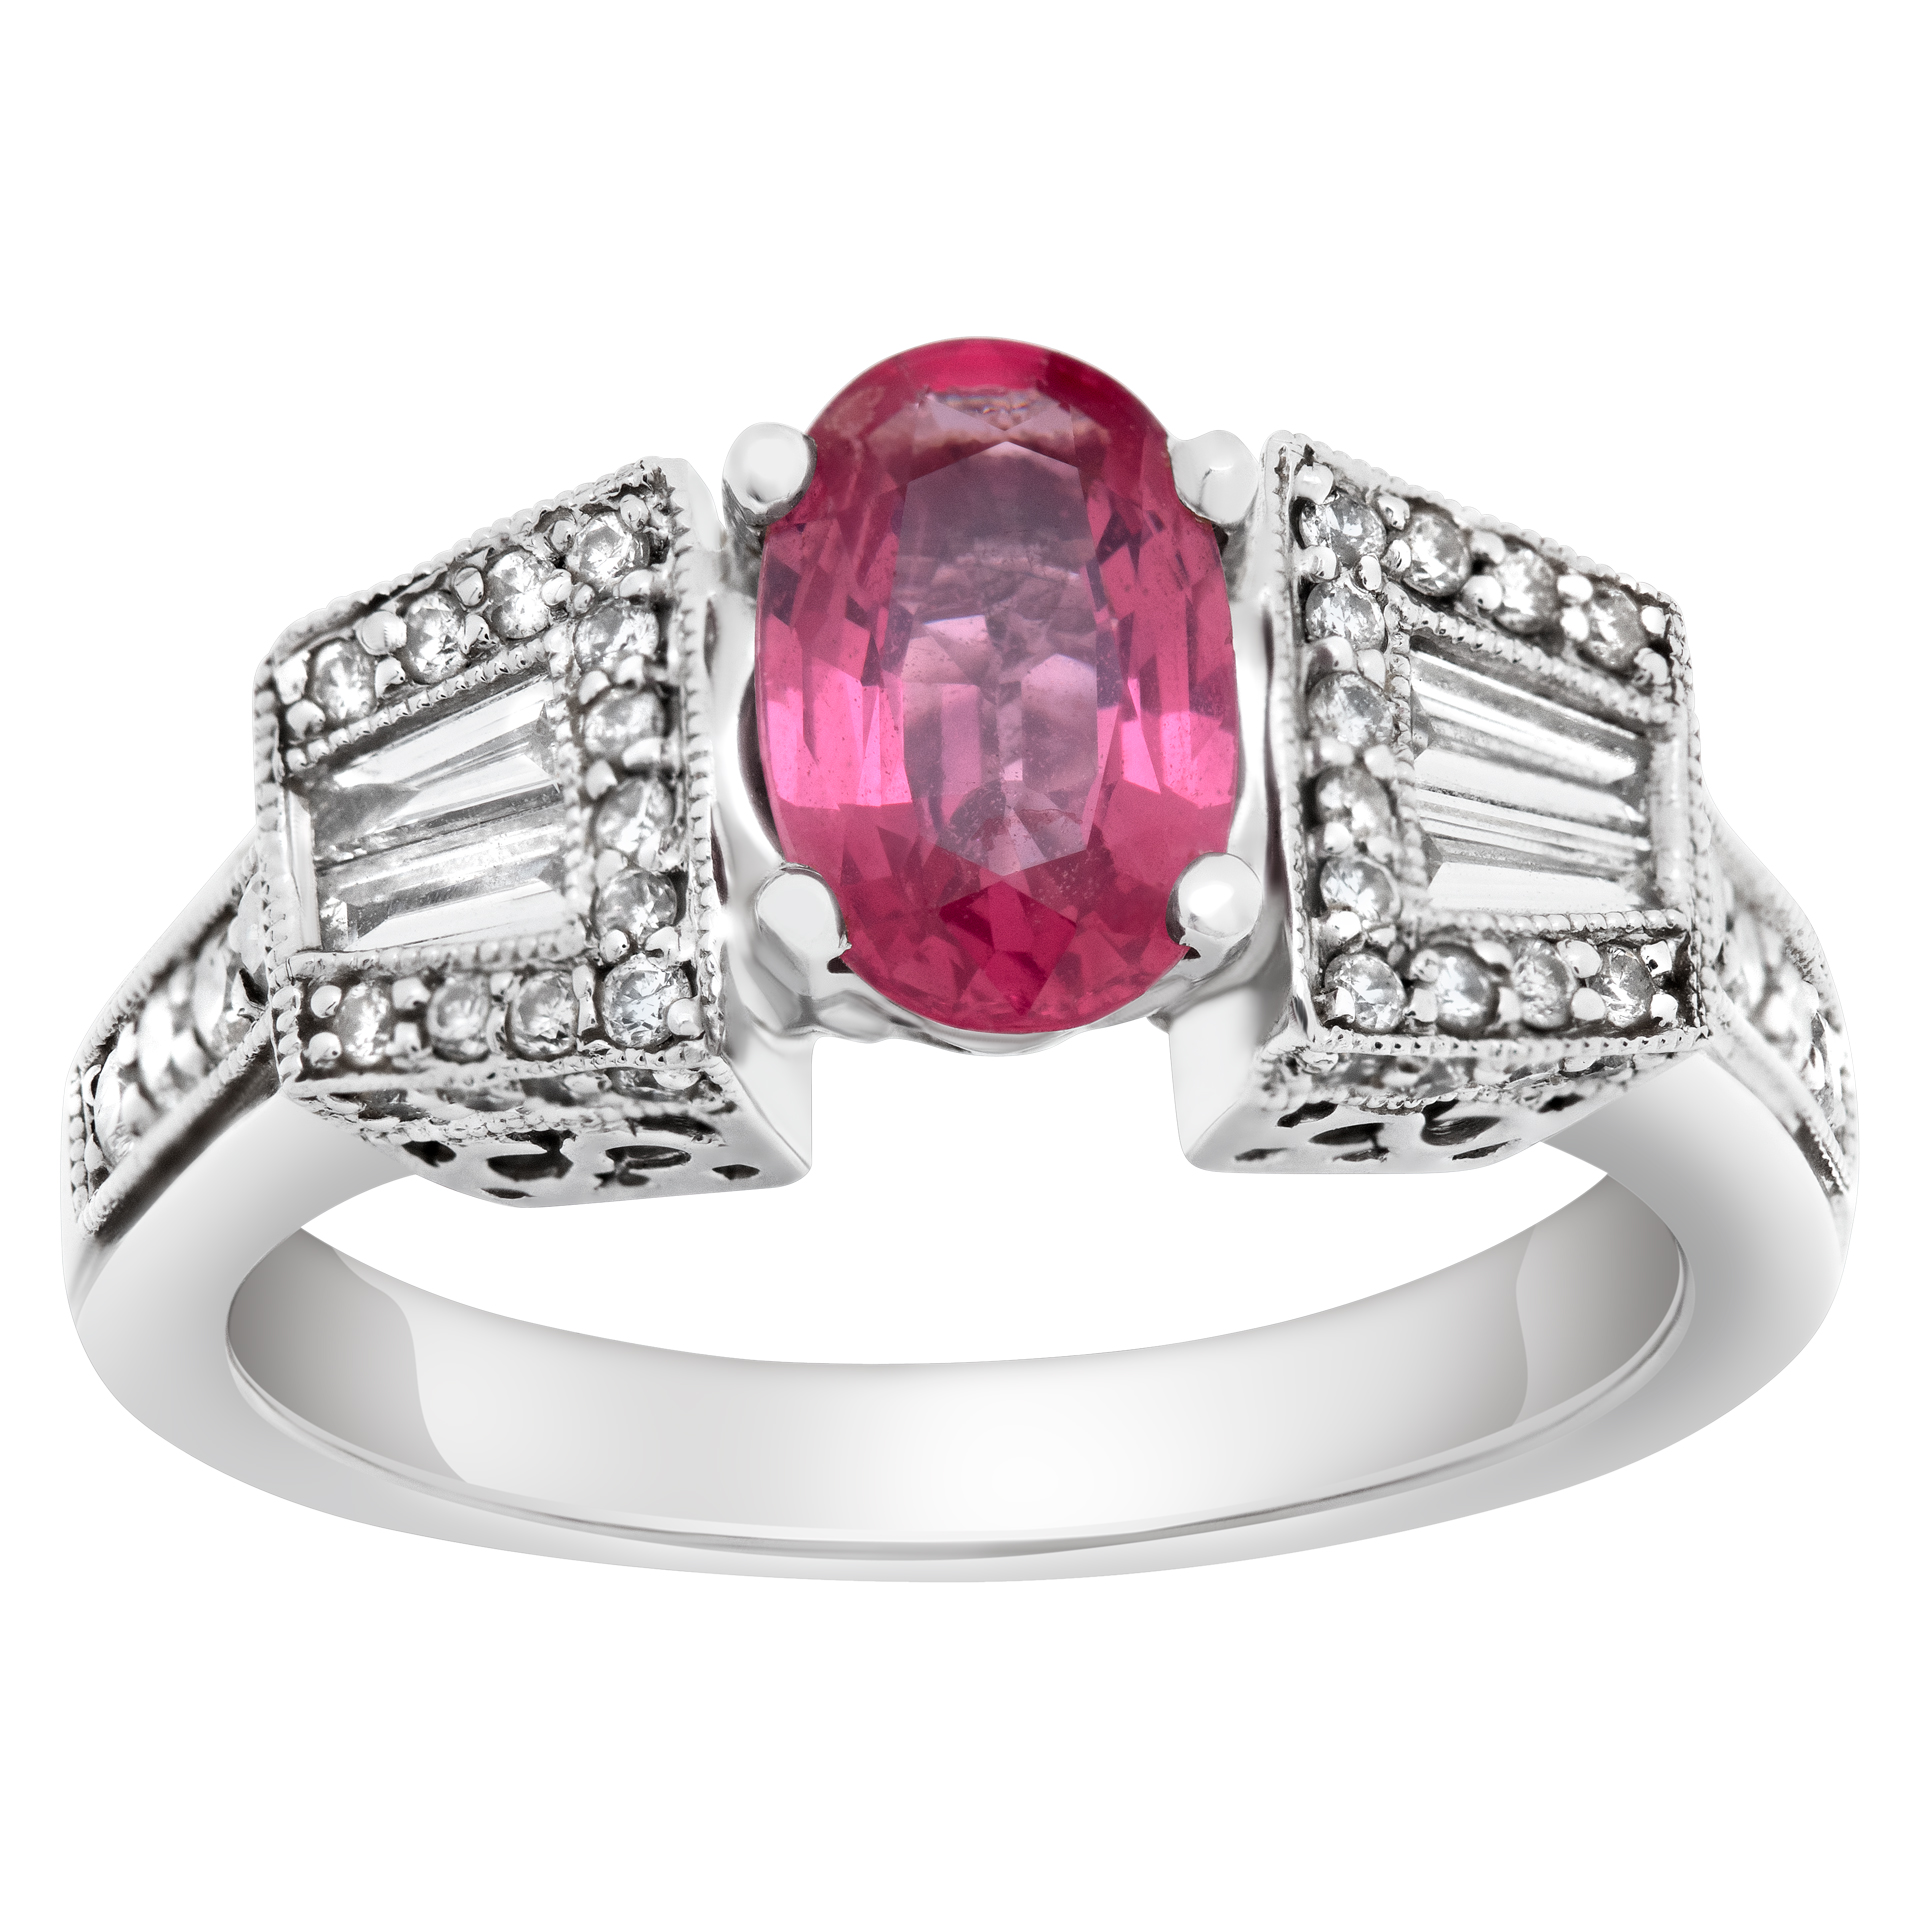 Oval brilliant cut pink spinel (approx. 2 carats) & diamonds ring set in 14K white gold